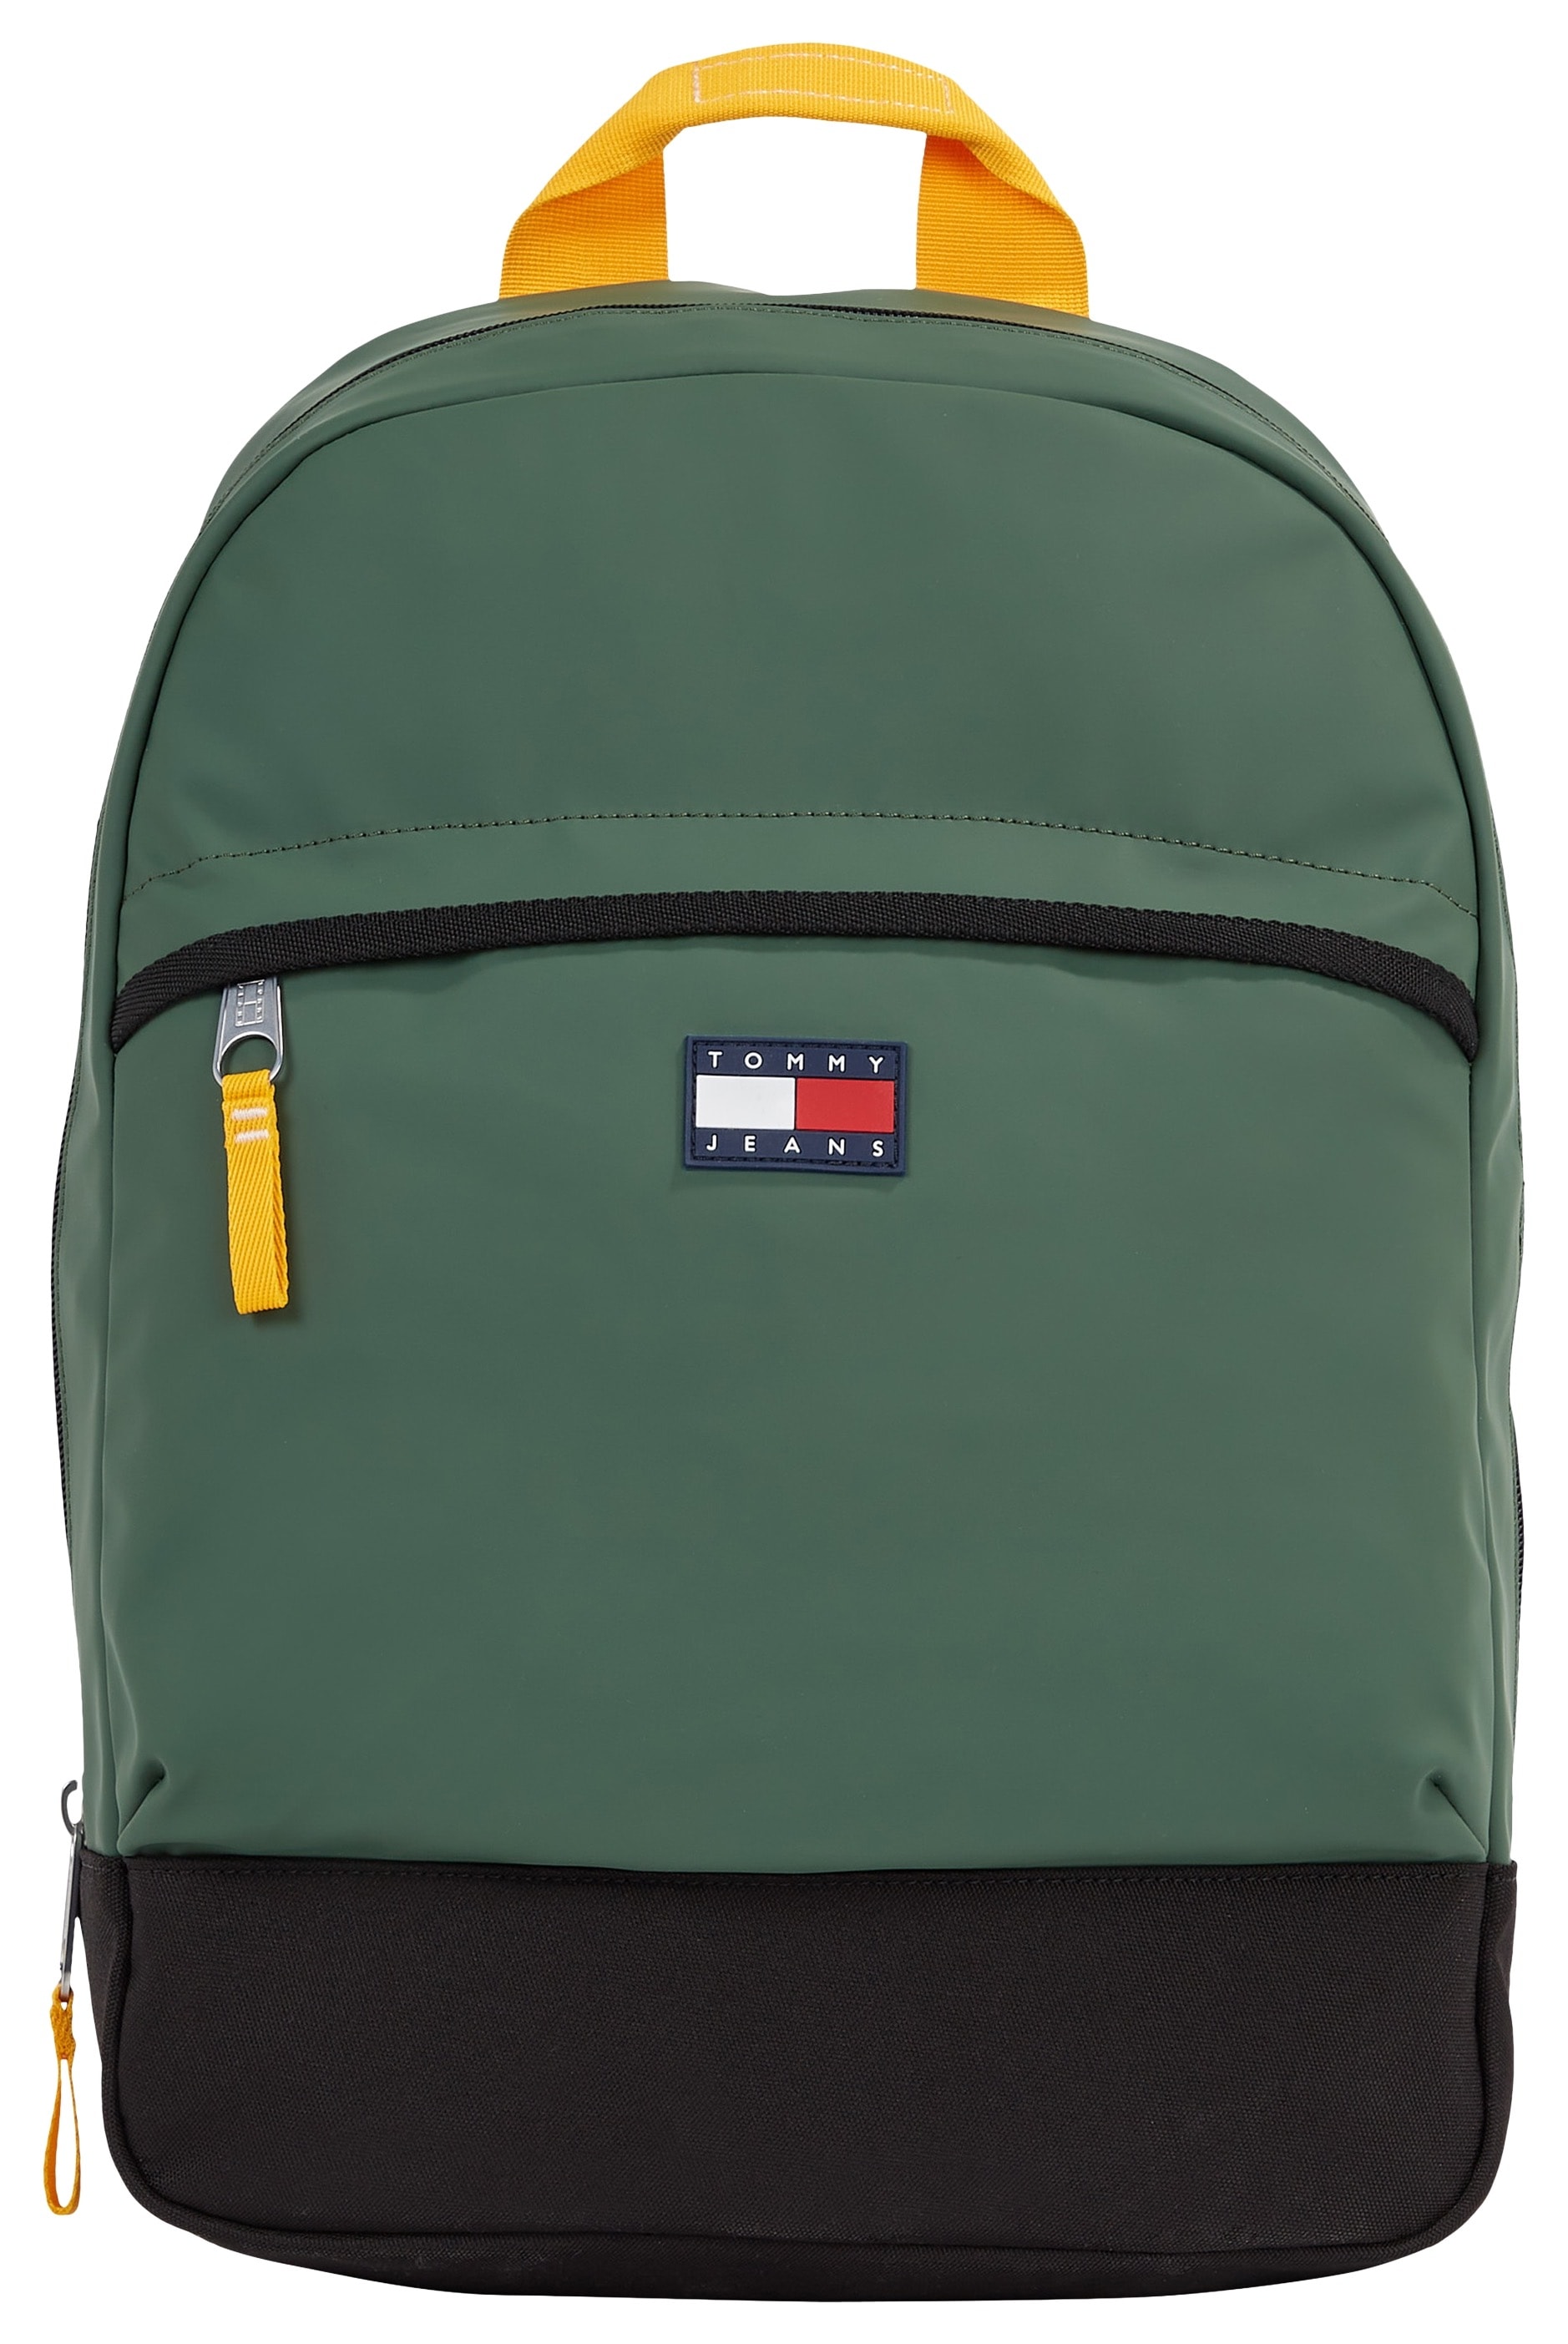 Tommy Jeans Cityrucksack »TJM FUNCTION DOME BACKPACK« von Tommy Jeans